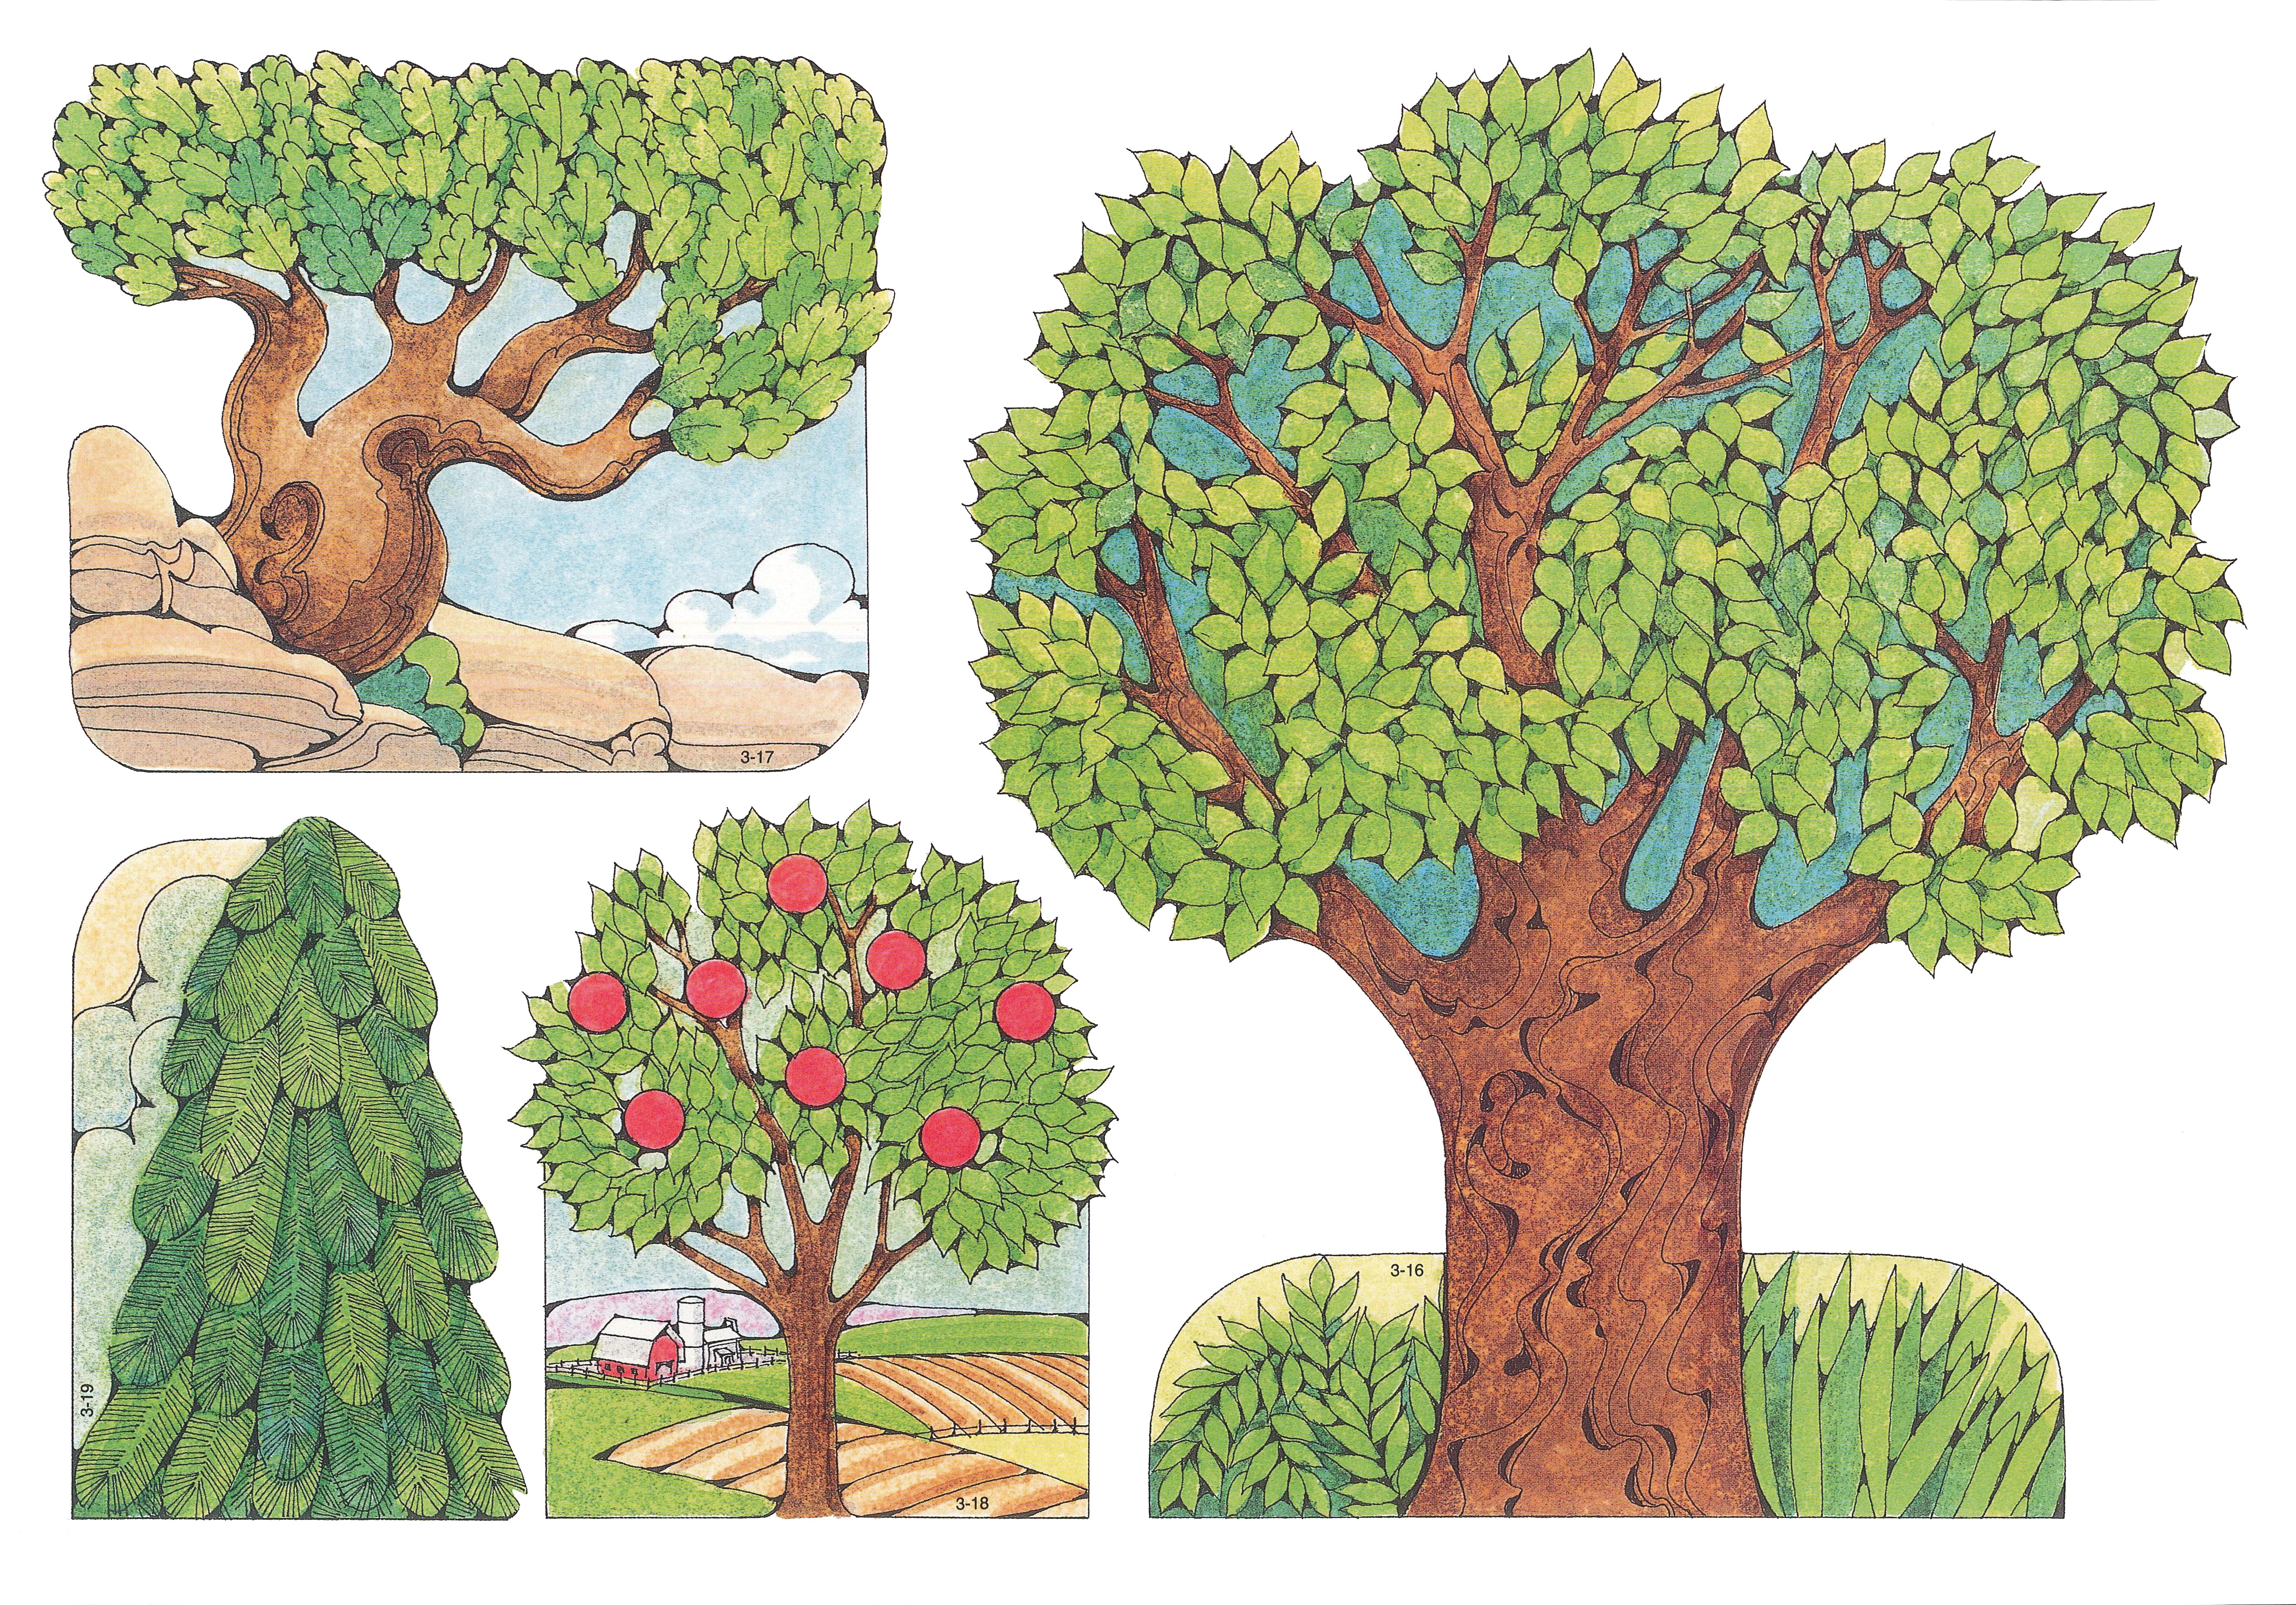 Primary cutouts of a large tree by grass, a small gnarled tree by rocks, a small tree with red apples on a farm, and a small pine tree.